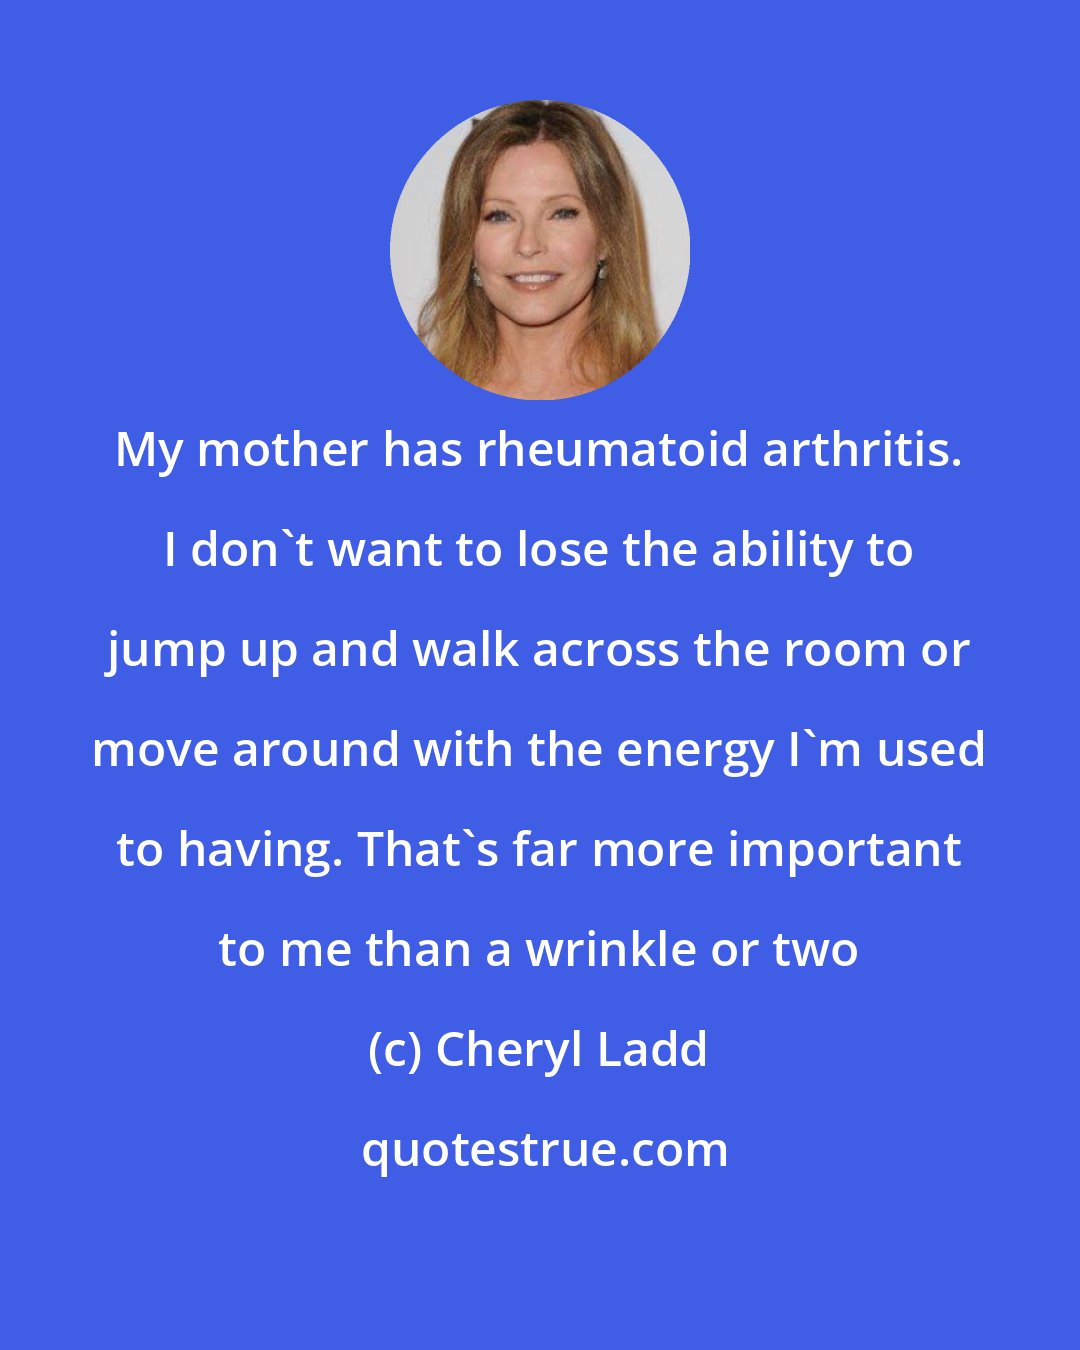 Cheryl Ladd: My mother has rheumatoid arthritis. I don't want to lose the ability to jump up and walk across the room or move around with the energy I'm used to having. That's far more important to me than a wrinkle or two